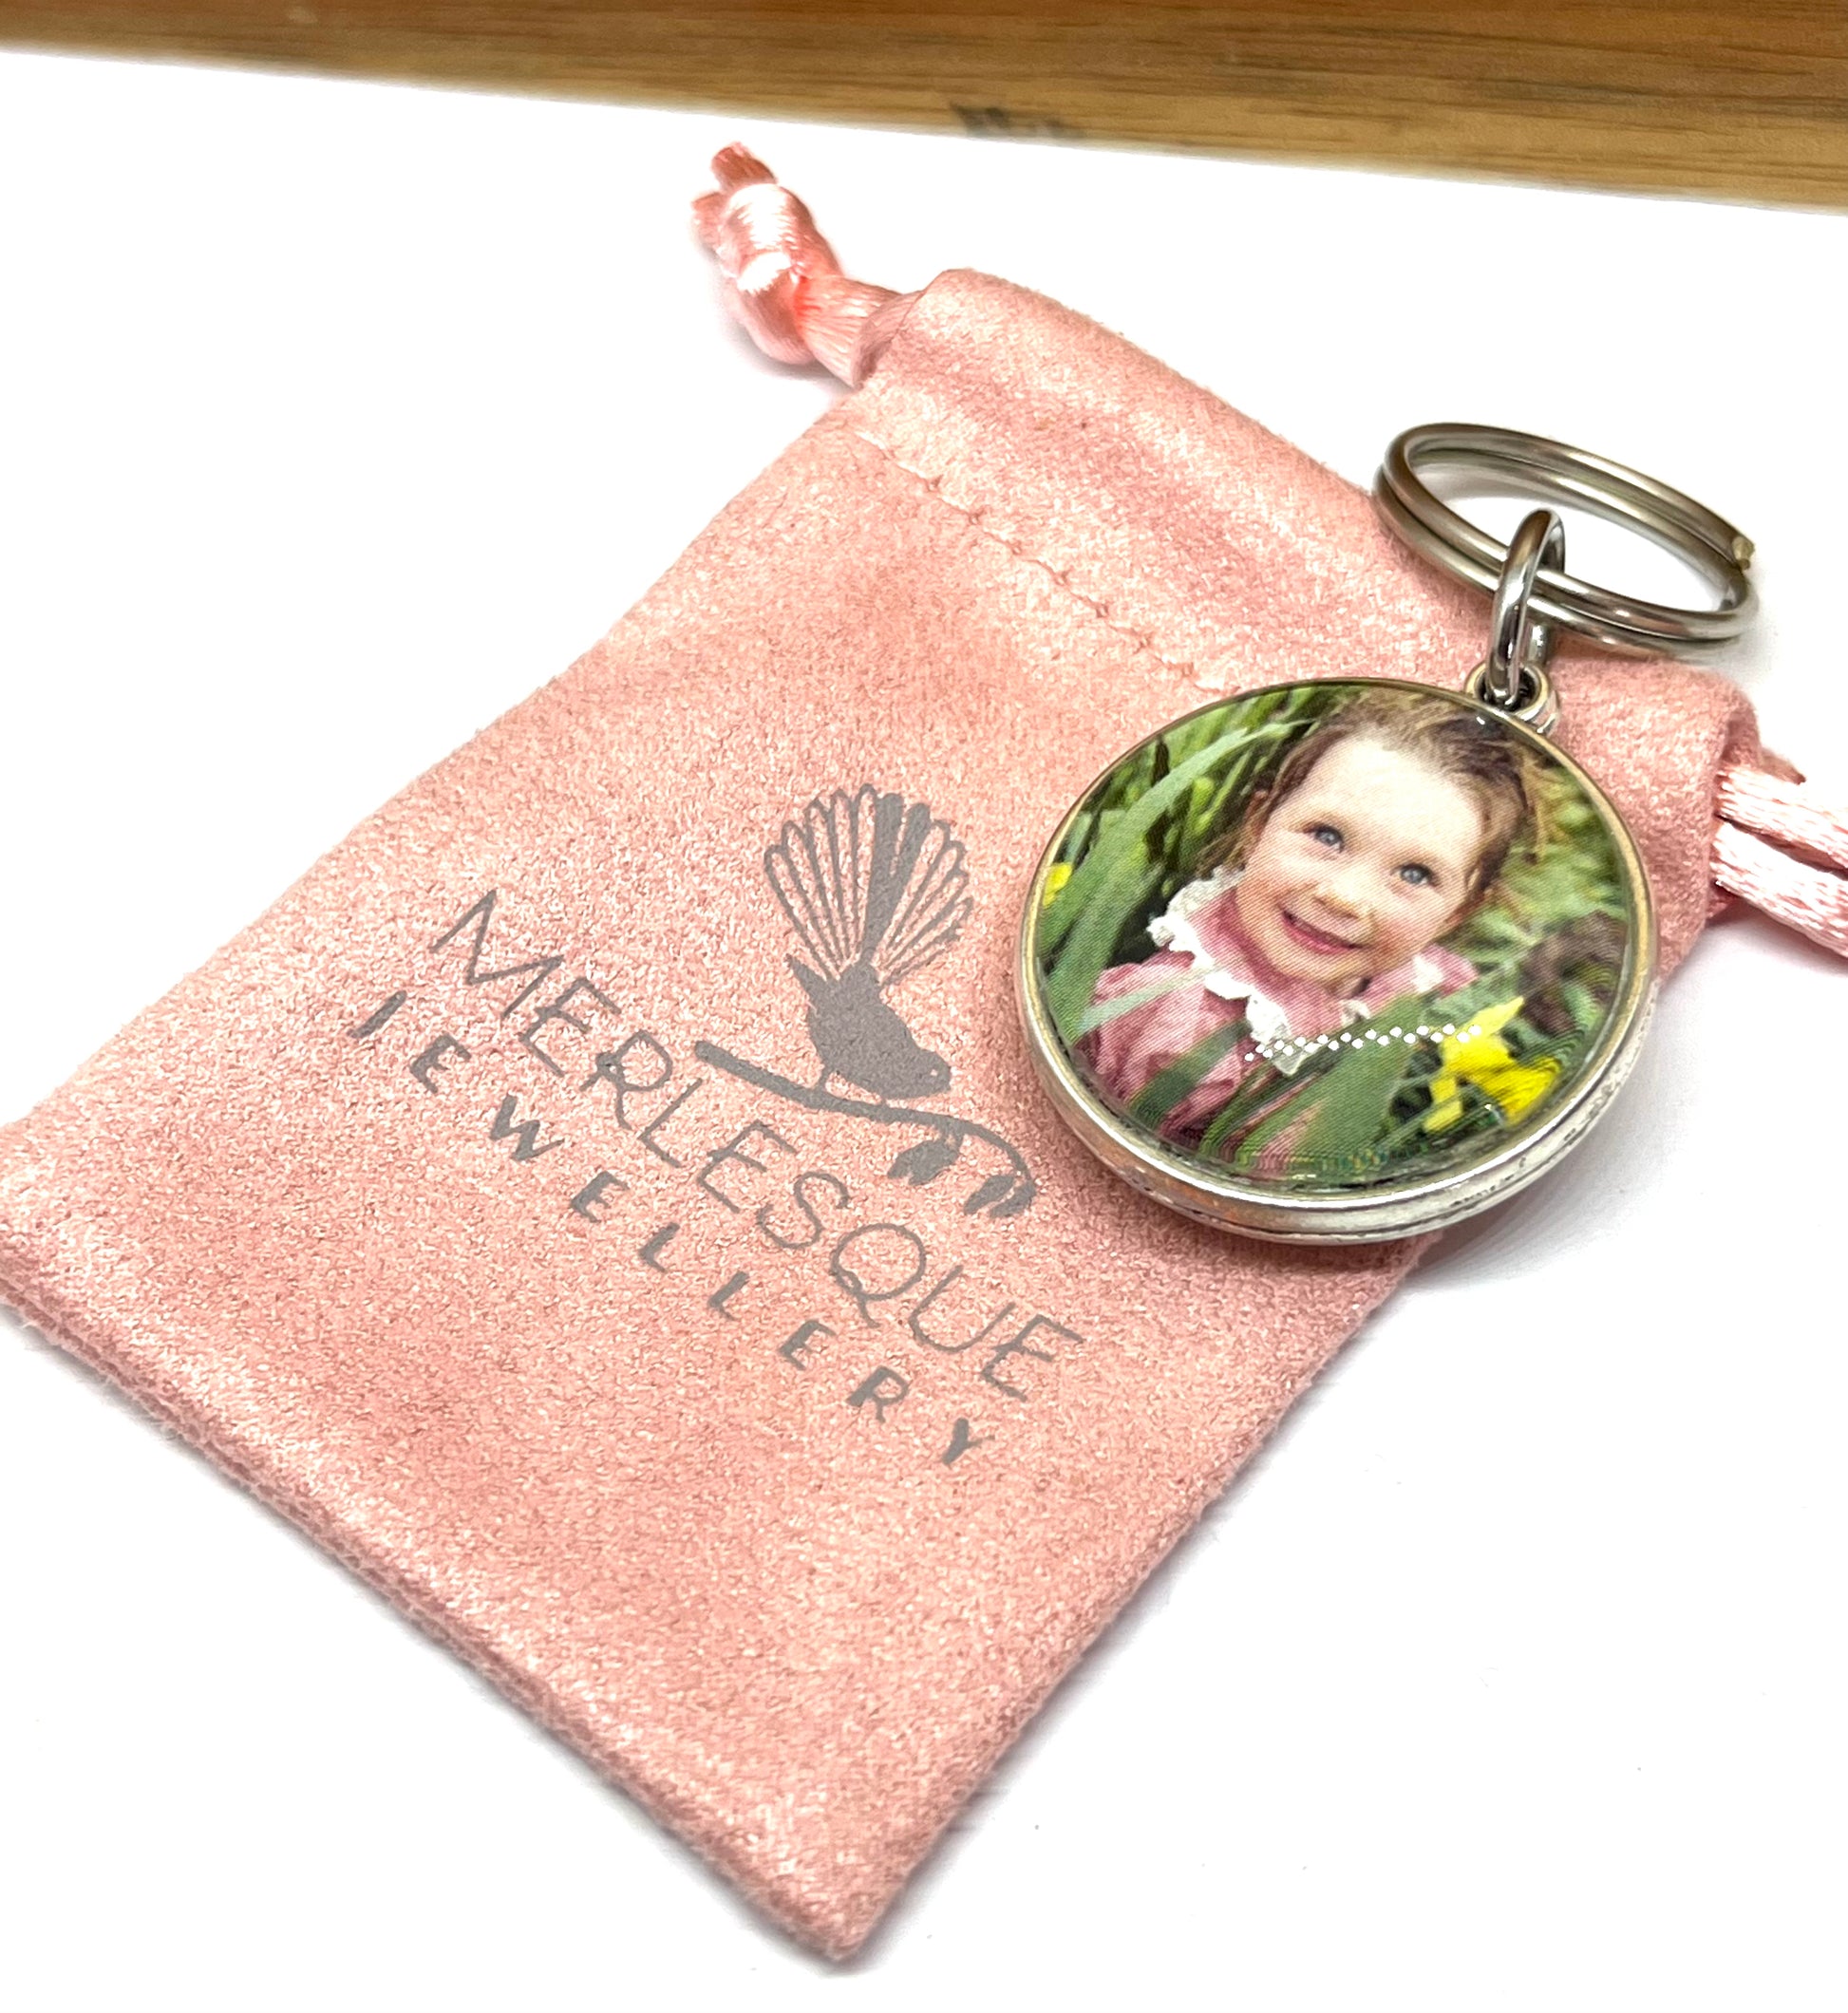 Photo keyring in a silver setting.